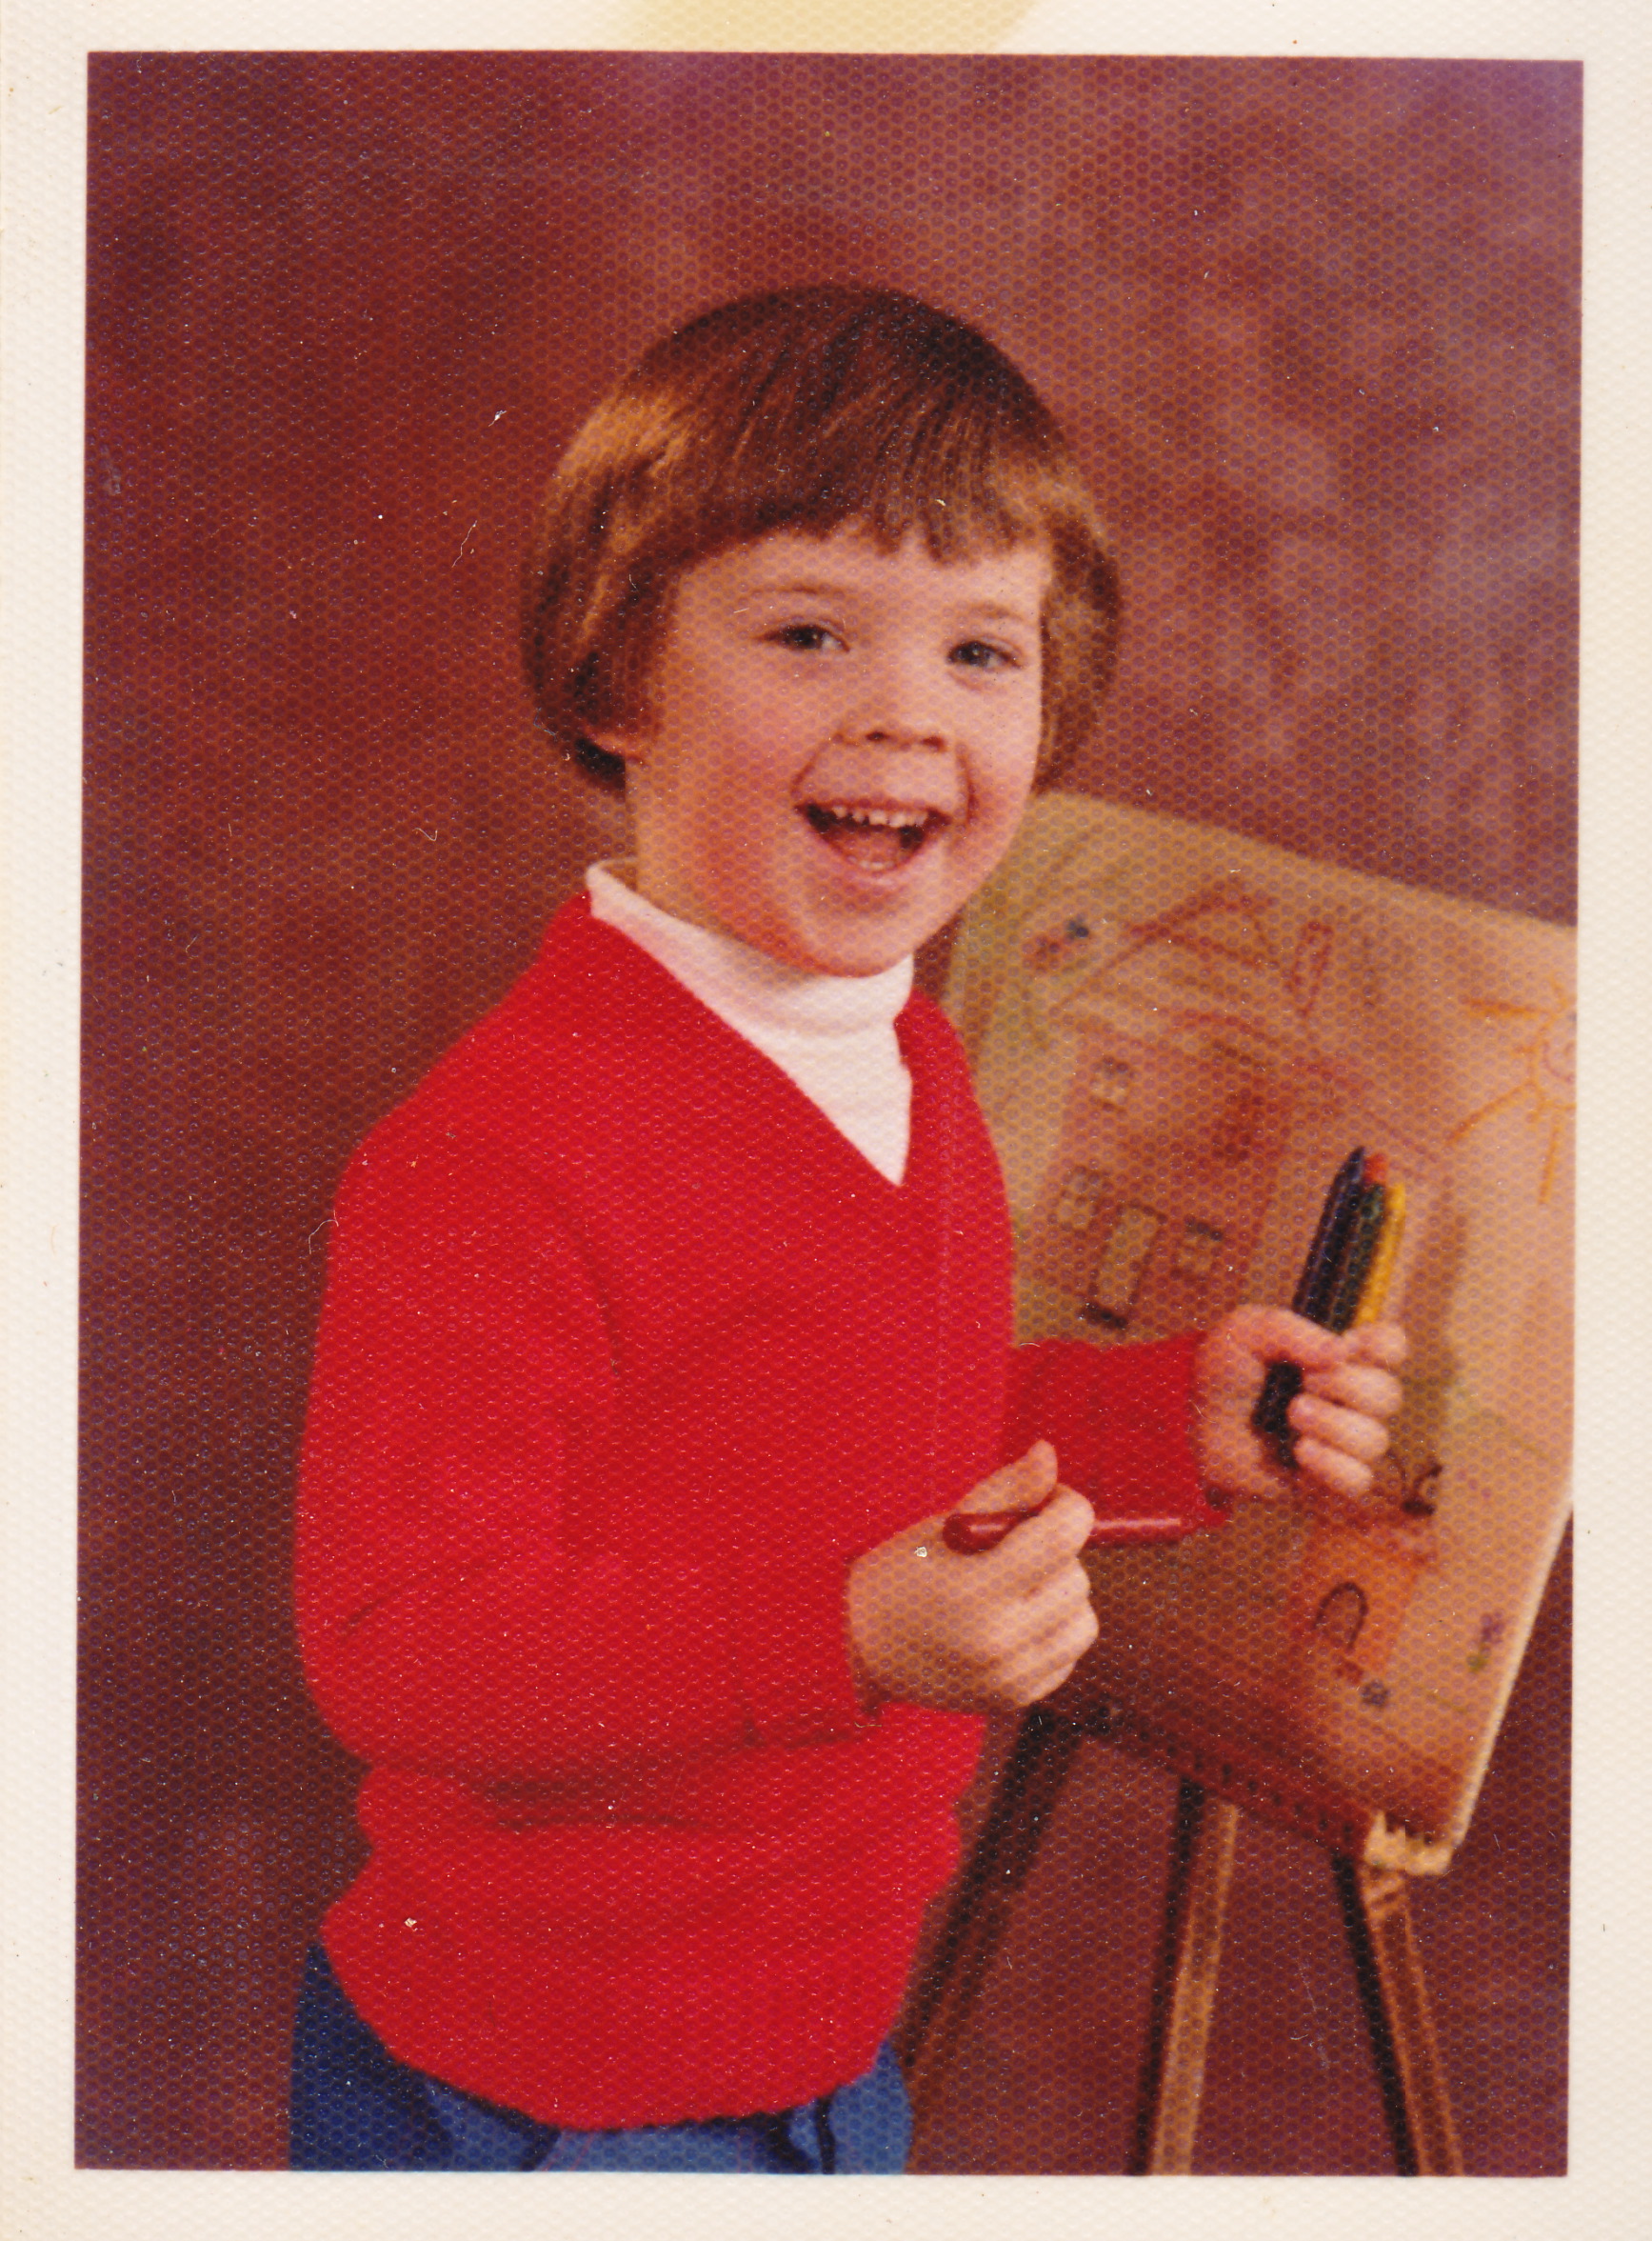 Keith MacLelland as a kid smiling at the camera with an easel and artwork behind him and crayons in his hand.